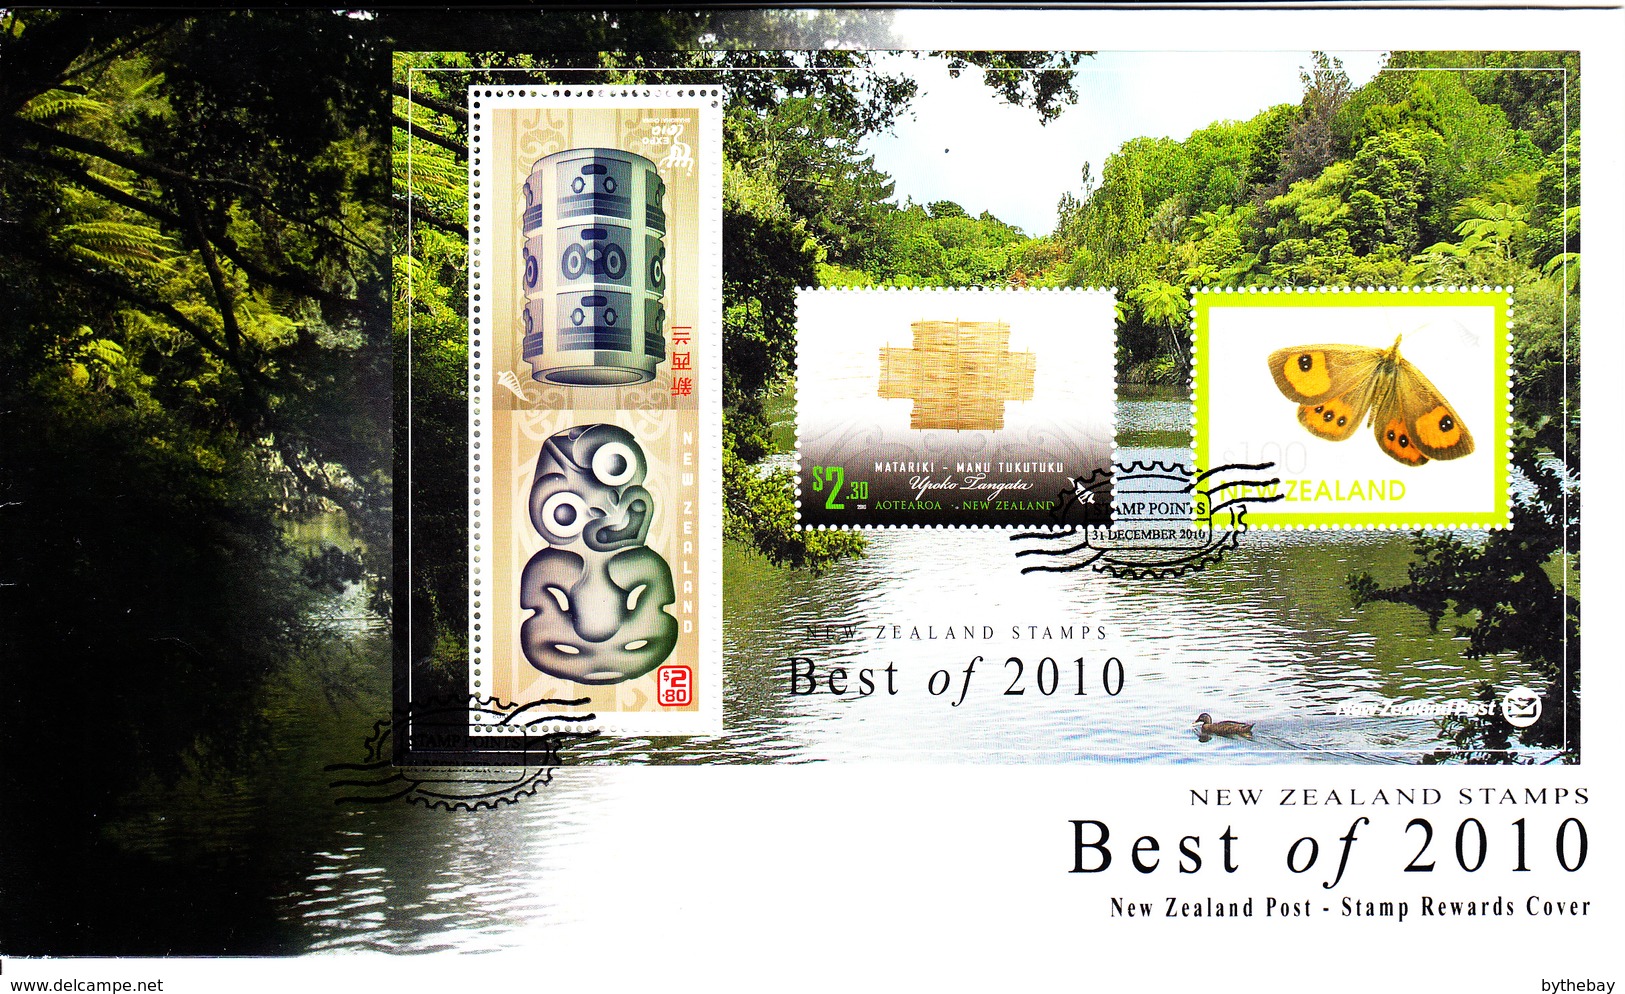 New Zealand Set Of 3 'Best Of 2010' Stamp Rewards Miniature Sheet On Covers Dated December 31, 2010 - Covers & Documents